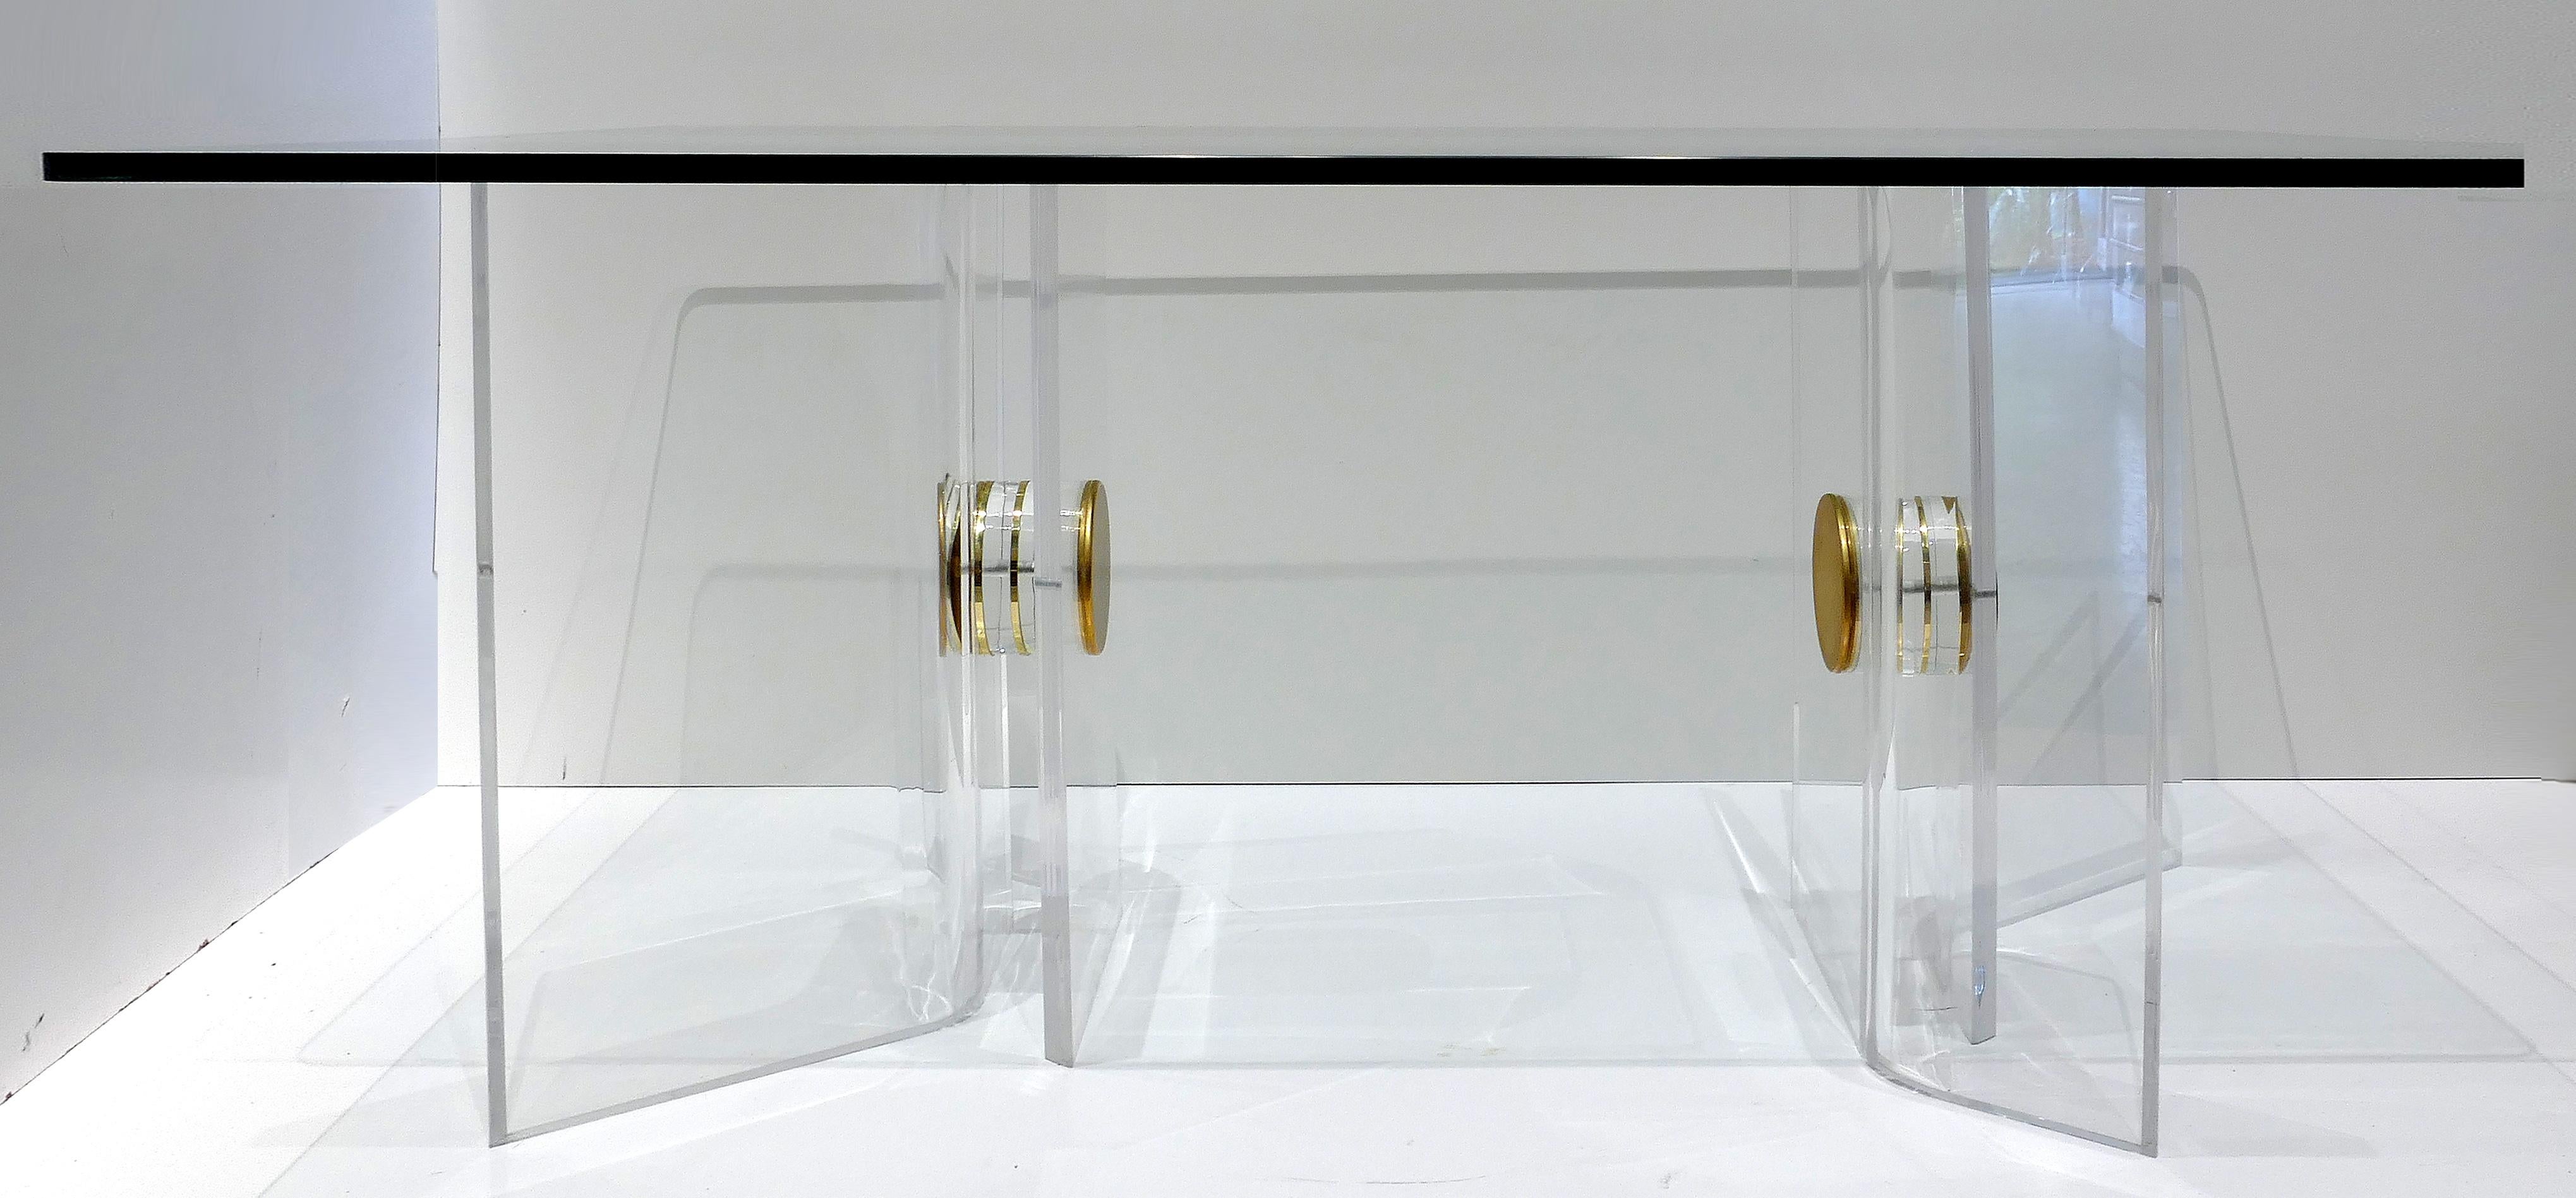 Karl Springer Lucite and brass desk with a glass top

Offered for sale is a stunning Karl Springer attributed Lucite and brass desk with glass top. The substantial Lucite bases are asymmetrically formed and assembled with Impressive overscale